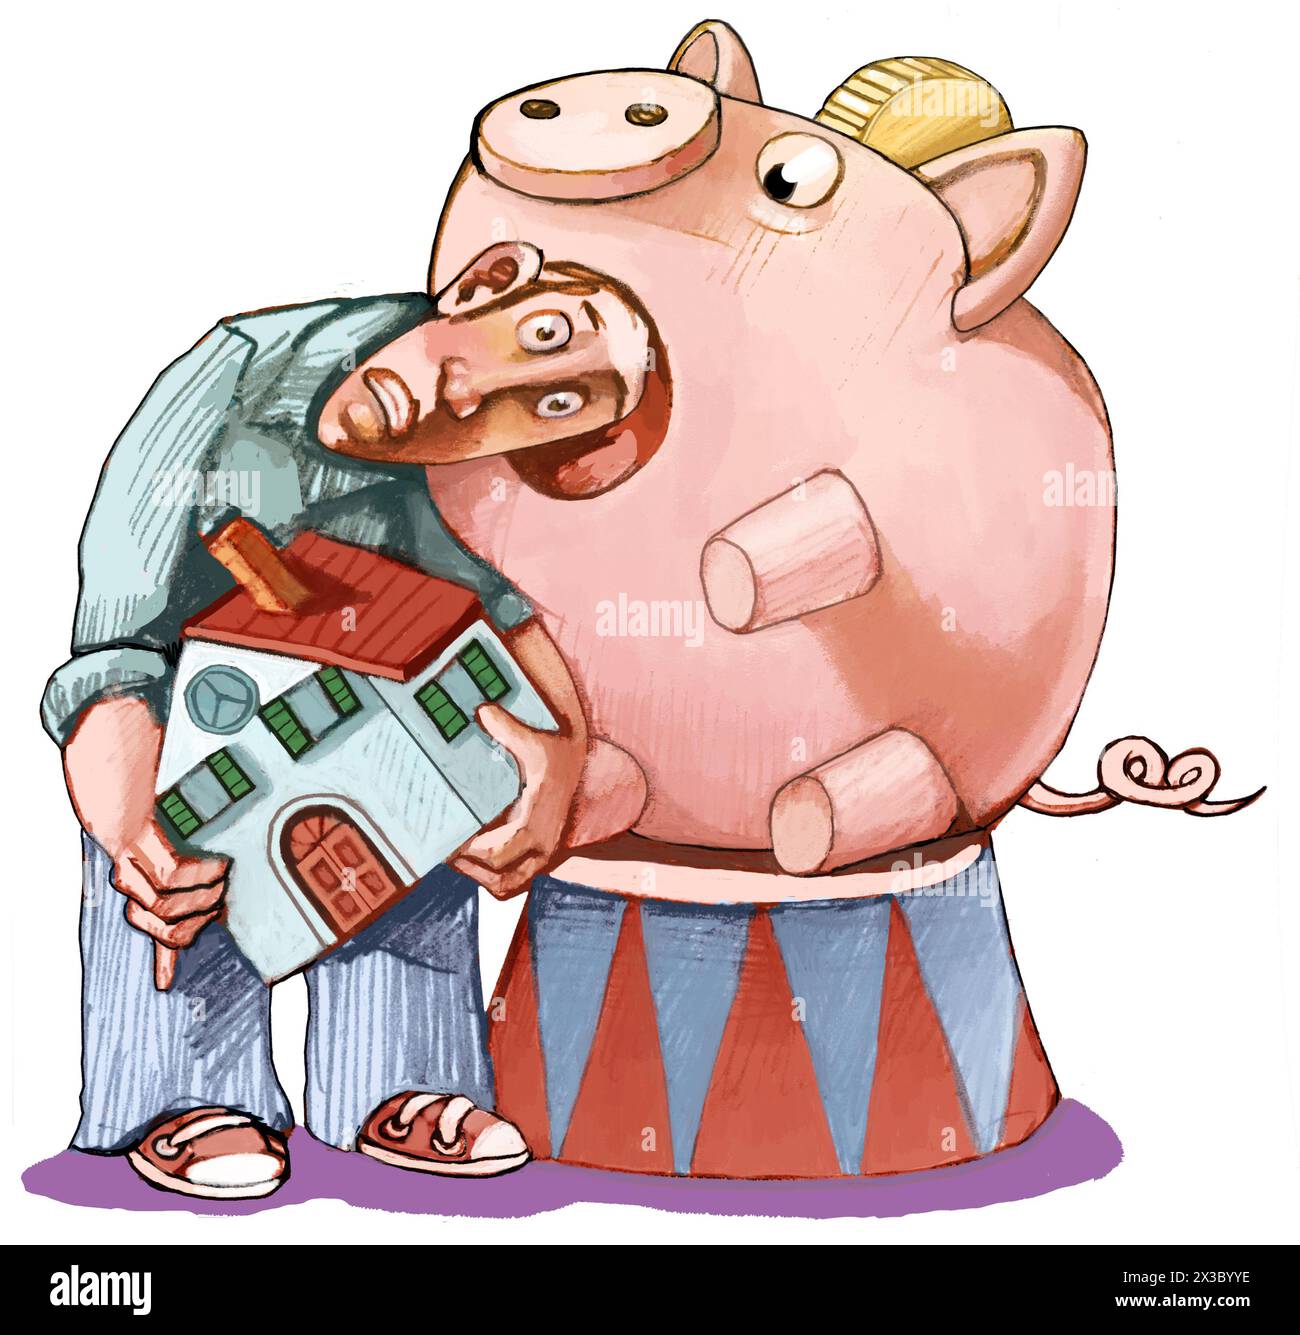 Man with his house in his arms sticks his head in the jaws of a piggybank, a metaphor for the rise of adjustable-rate mortgages and greed of banks Stock Photo